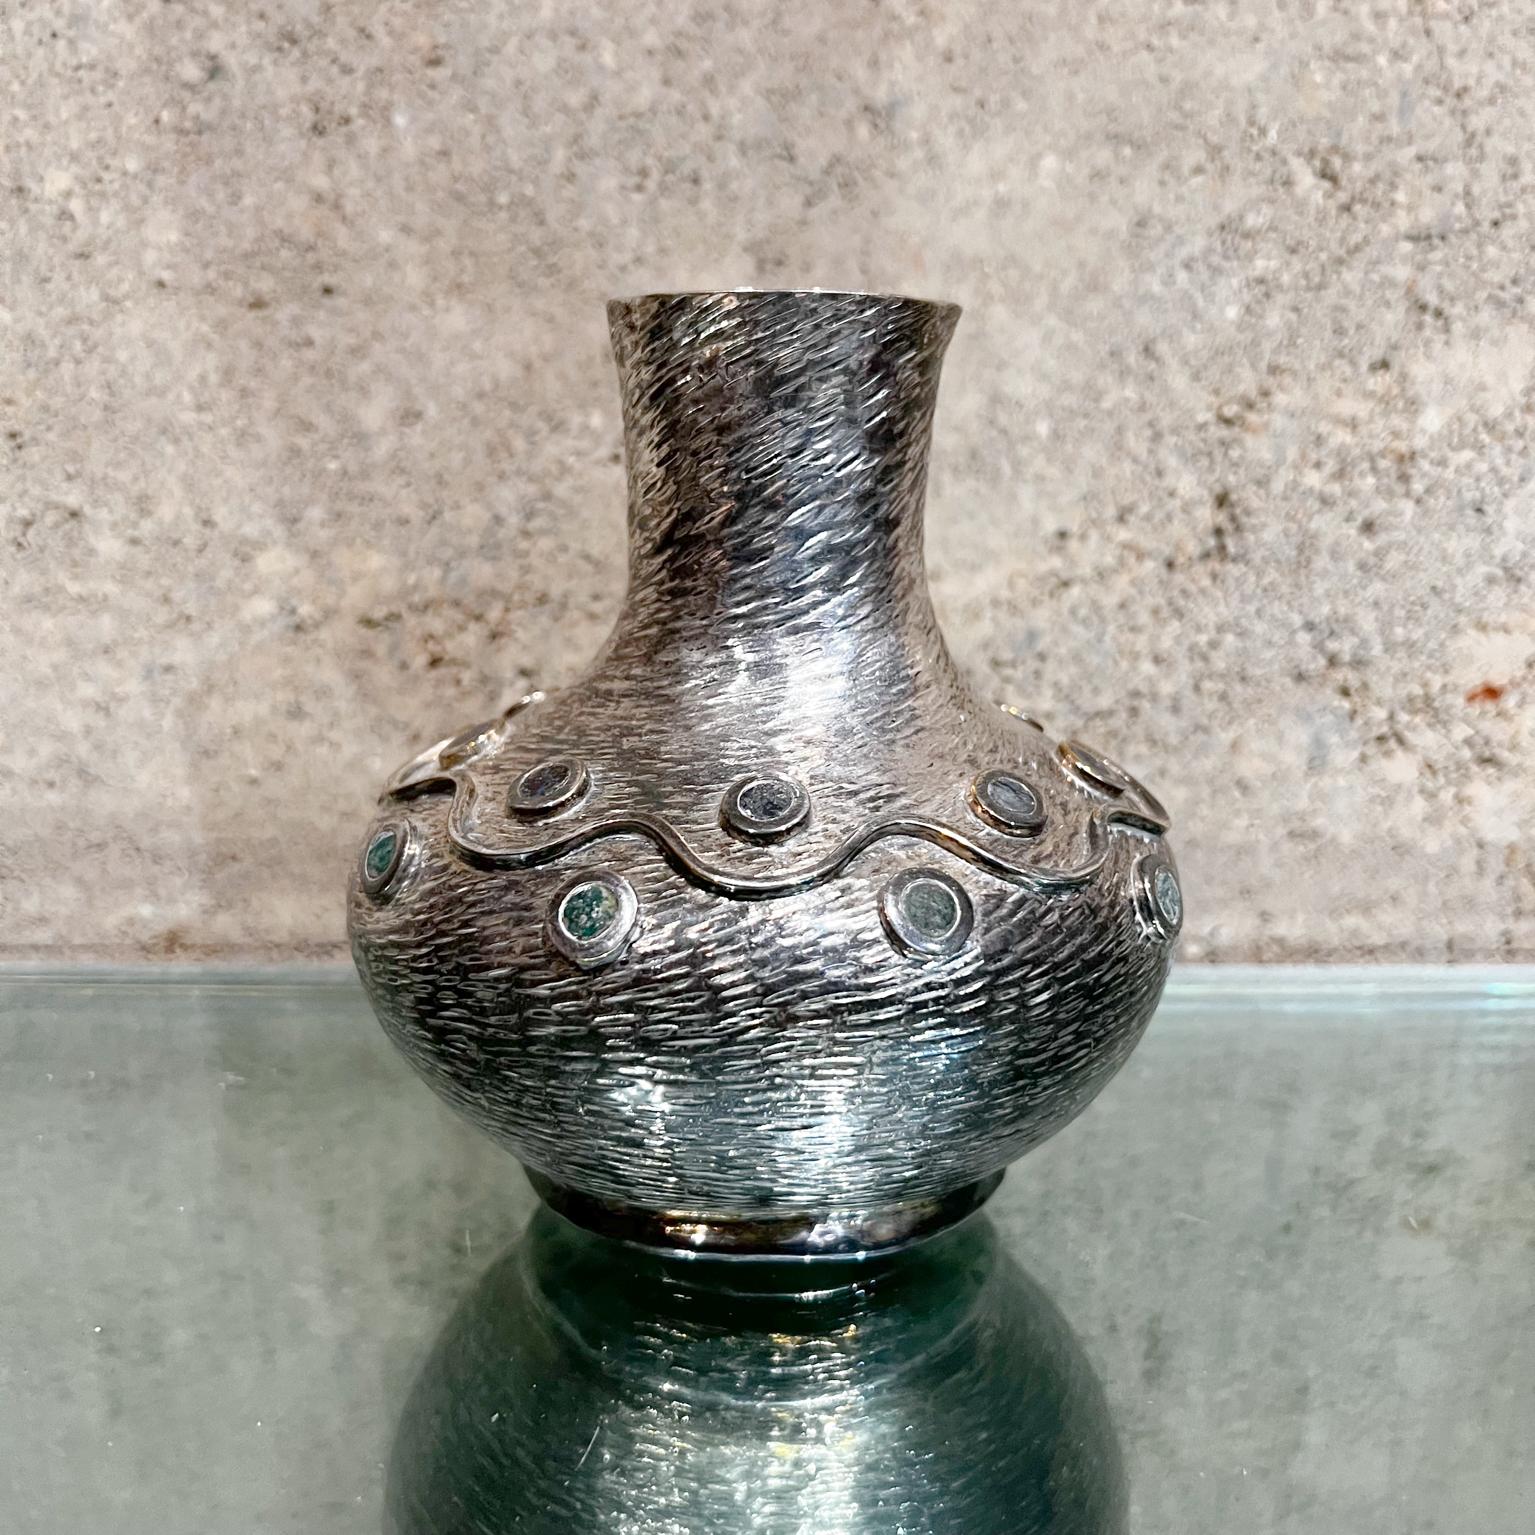 1950s Los Castillo modern silver vase from Mexico
Finely crafted hand-wrought silver over copper with abalone inlay detail. 
Signed Los Castillo Taxco Mexico.
5 tall x 5 diameter
Preowned original unrestored vintage condition.
Review images